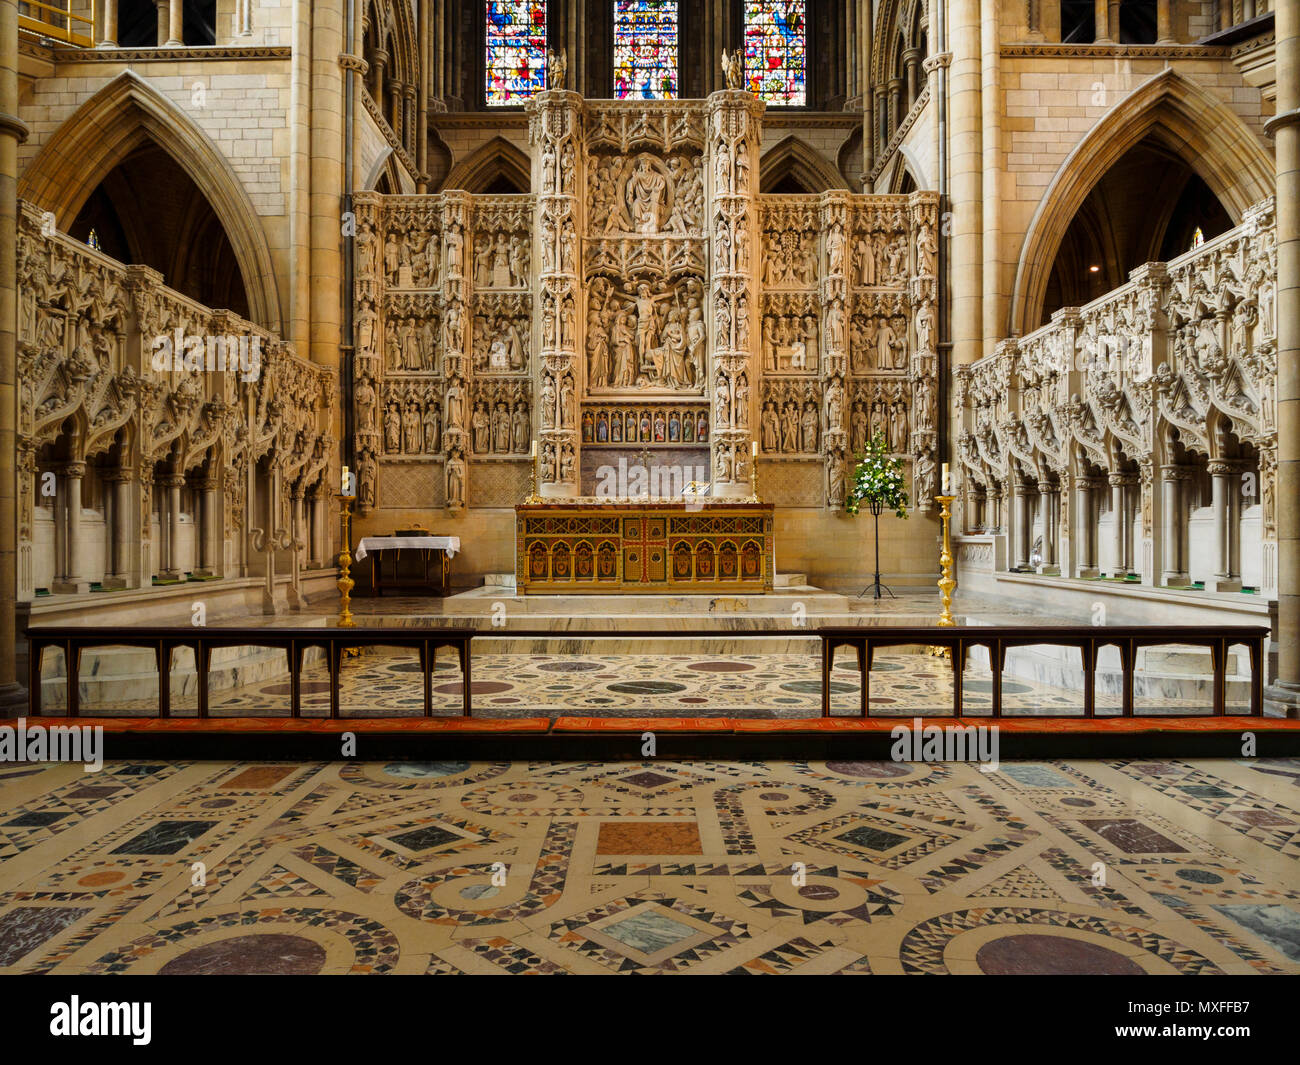 Altar and intricately carved reredos below the stained glass window of the Victorian Truro Cathedral, Cornwall, UK Stock Photo